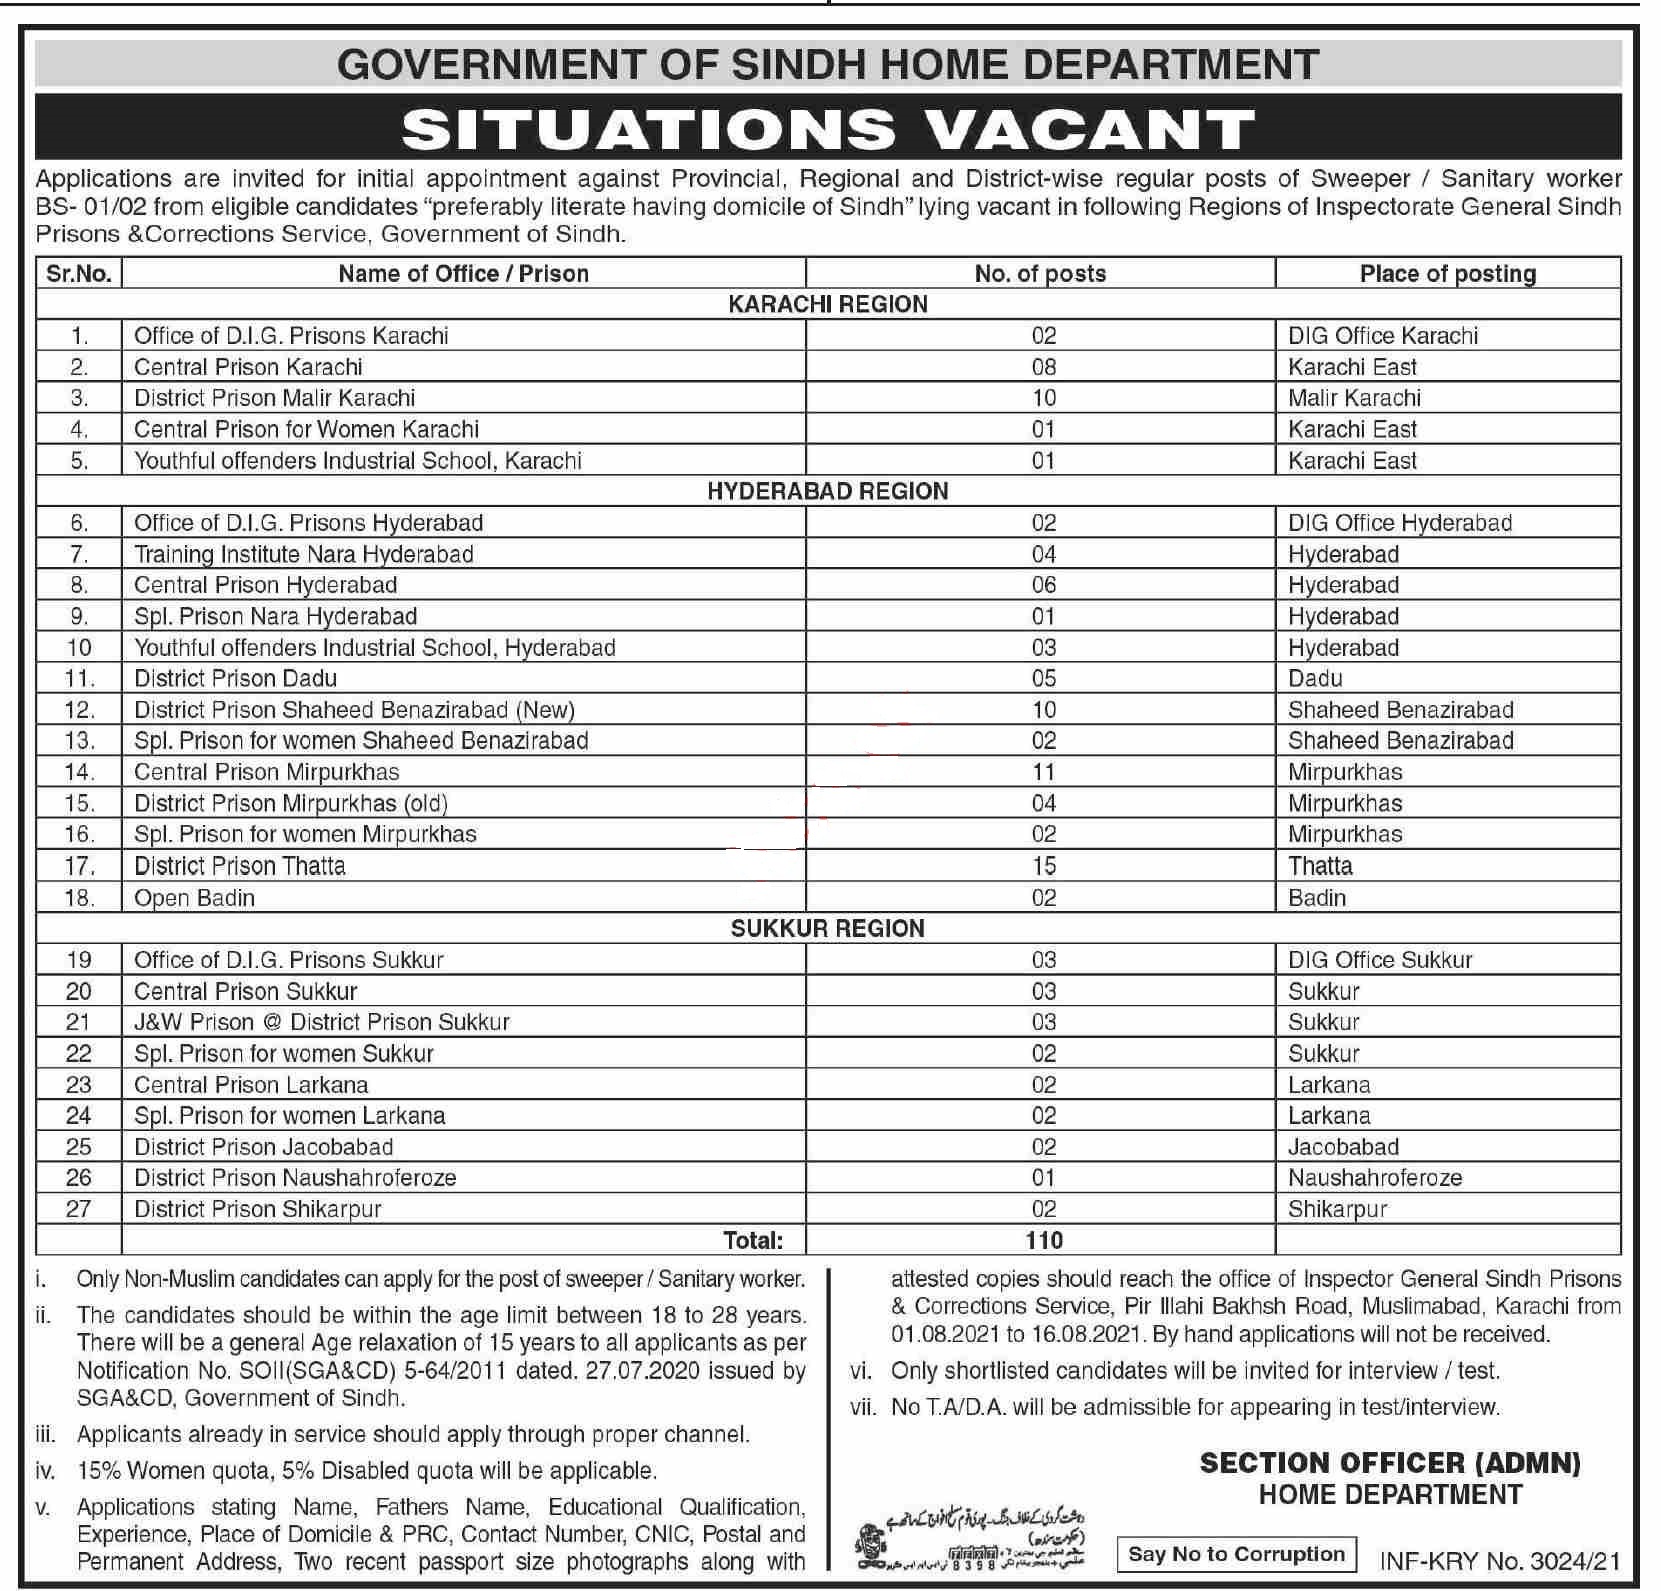 Home Department Karachi, Government of Sindh Jobs 2021